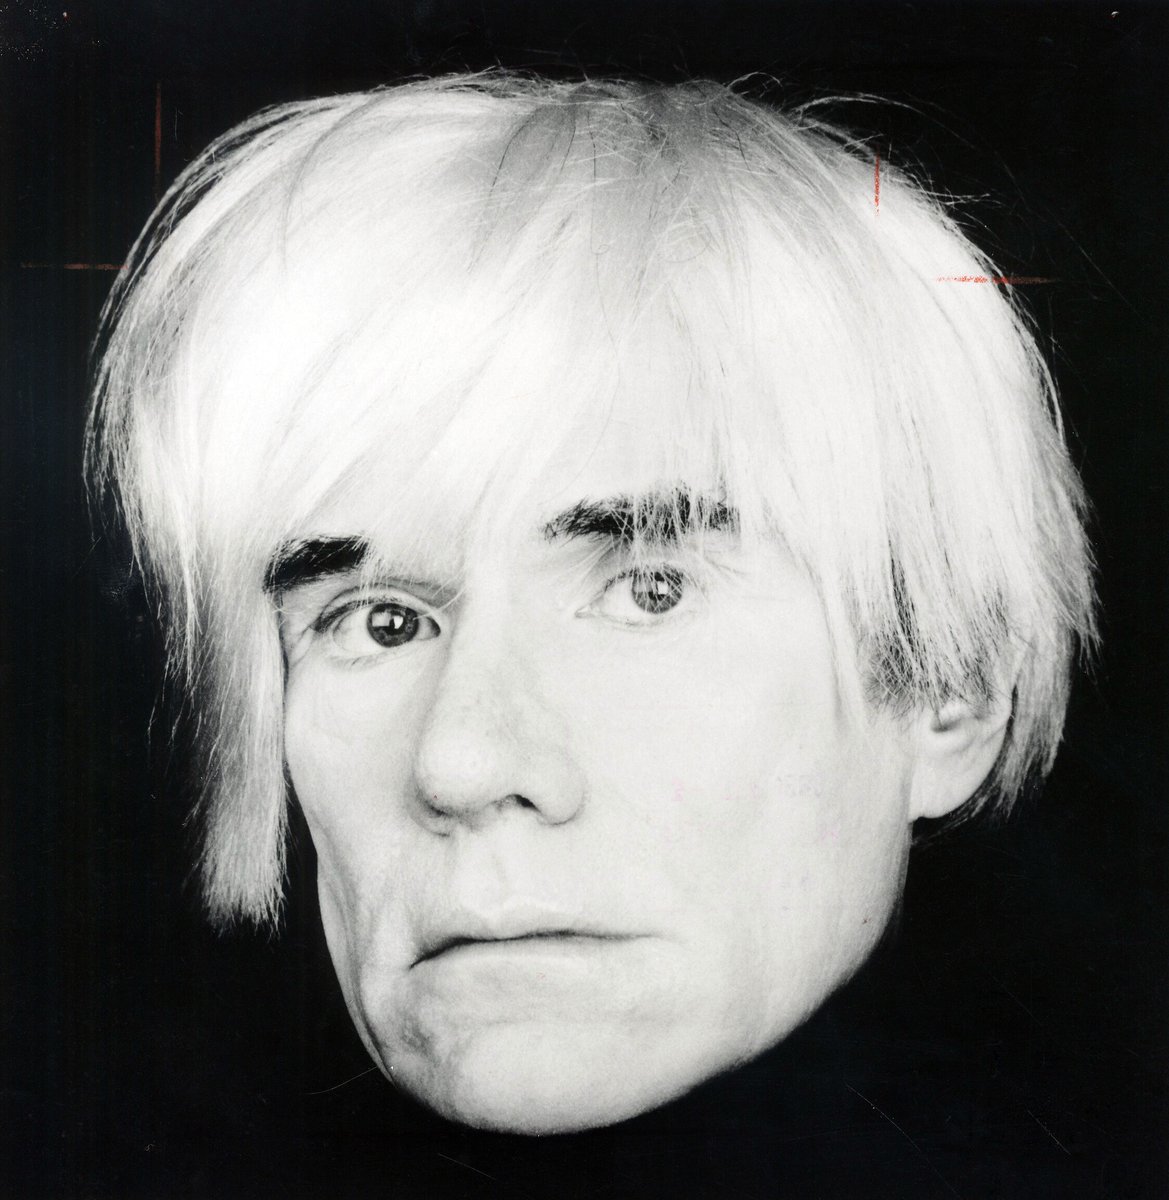 History of Media from
Iconic Visions
Robert Mapplethorpe
Andy Warhol

AUCTION ENDS SOON:
Thursday, February 2nd, 2023
@ 5 PM EST
⁠VIEW LOT and BID:
live.phiauctions.com/auctions/4-8FX…

#RobertMapplethorpe #AndyWarhol #celebrityphotographer #photography #photoart #iconicphoto #rareprint #art